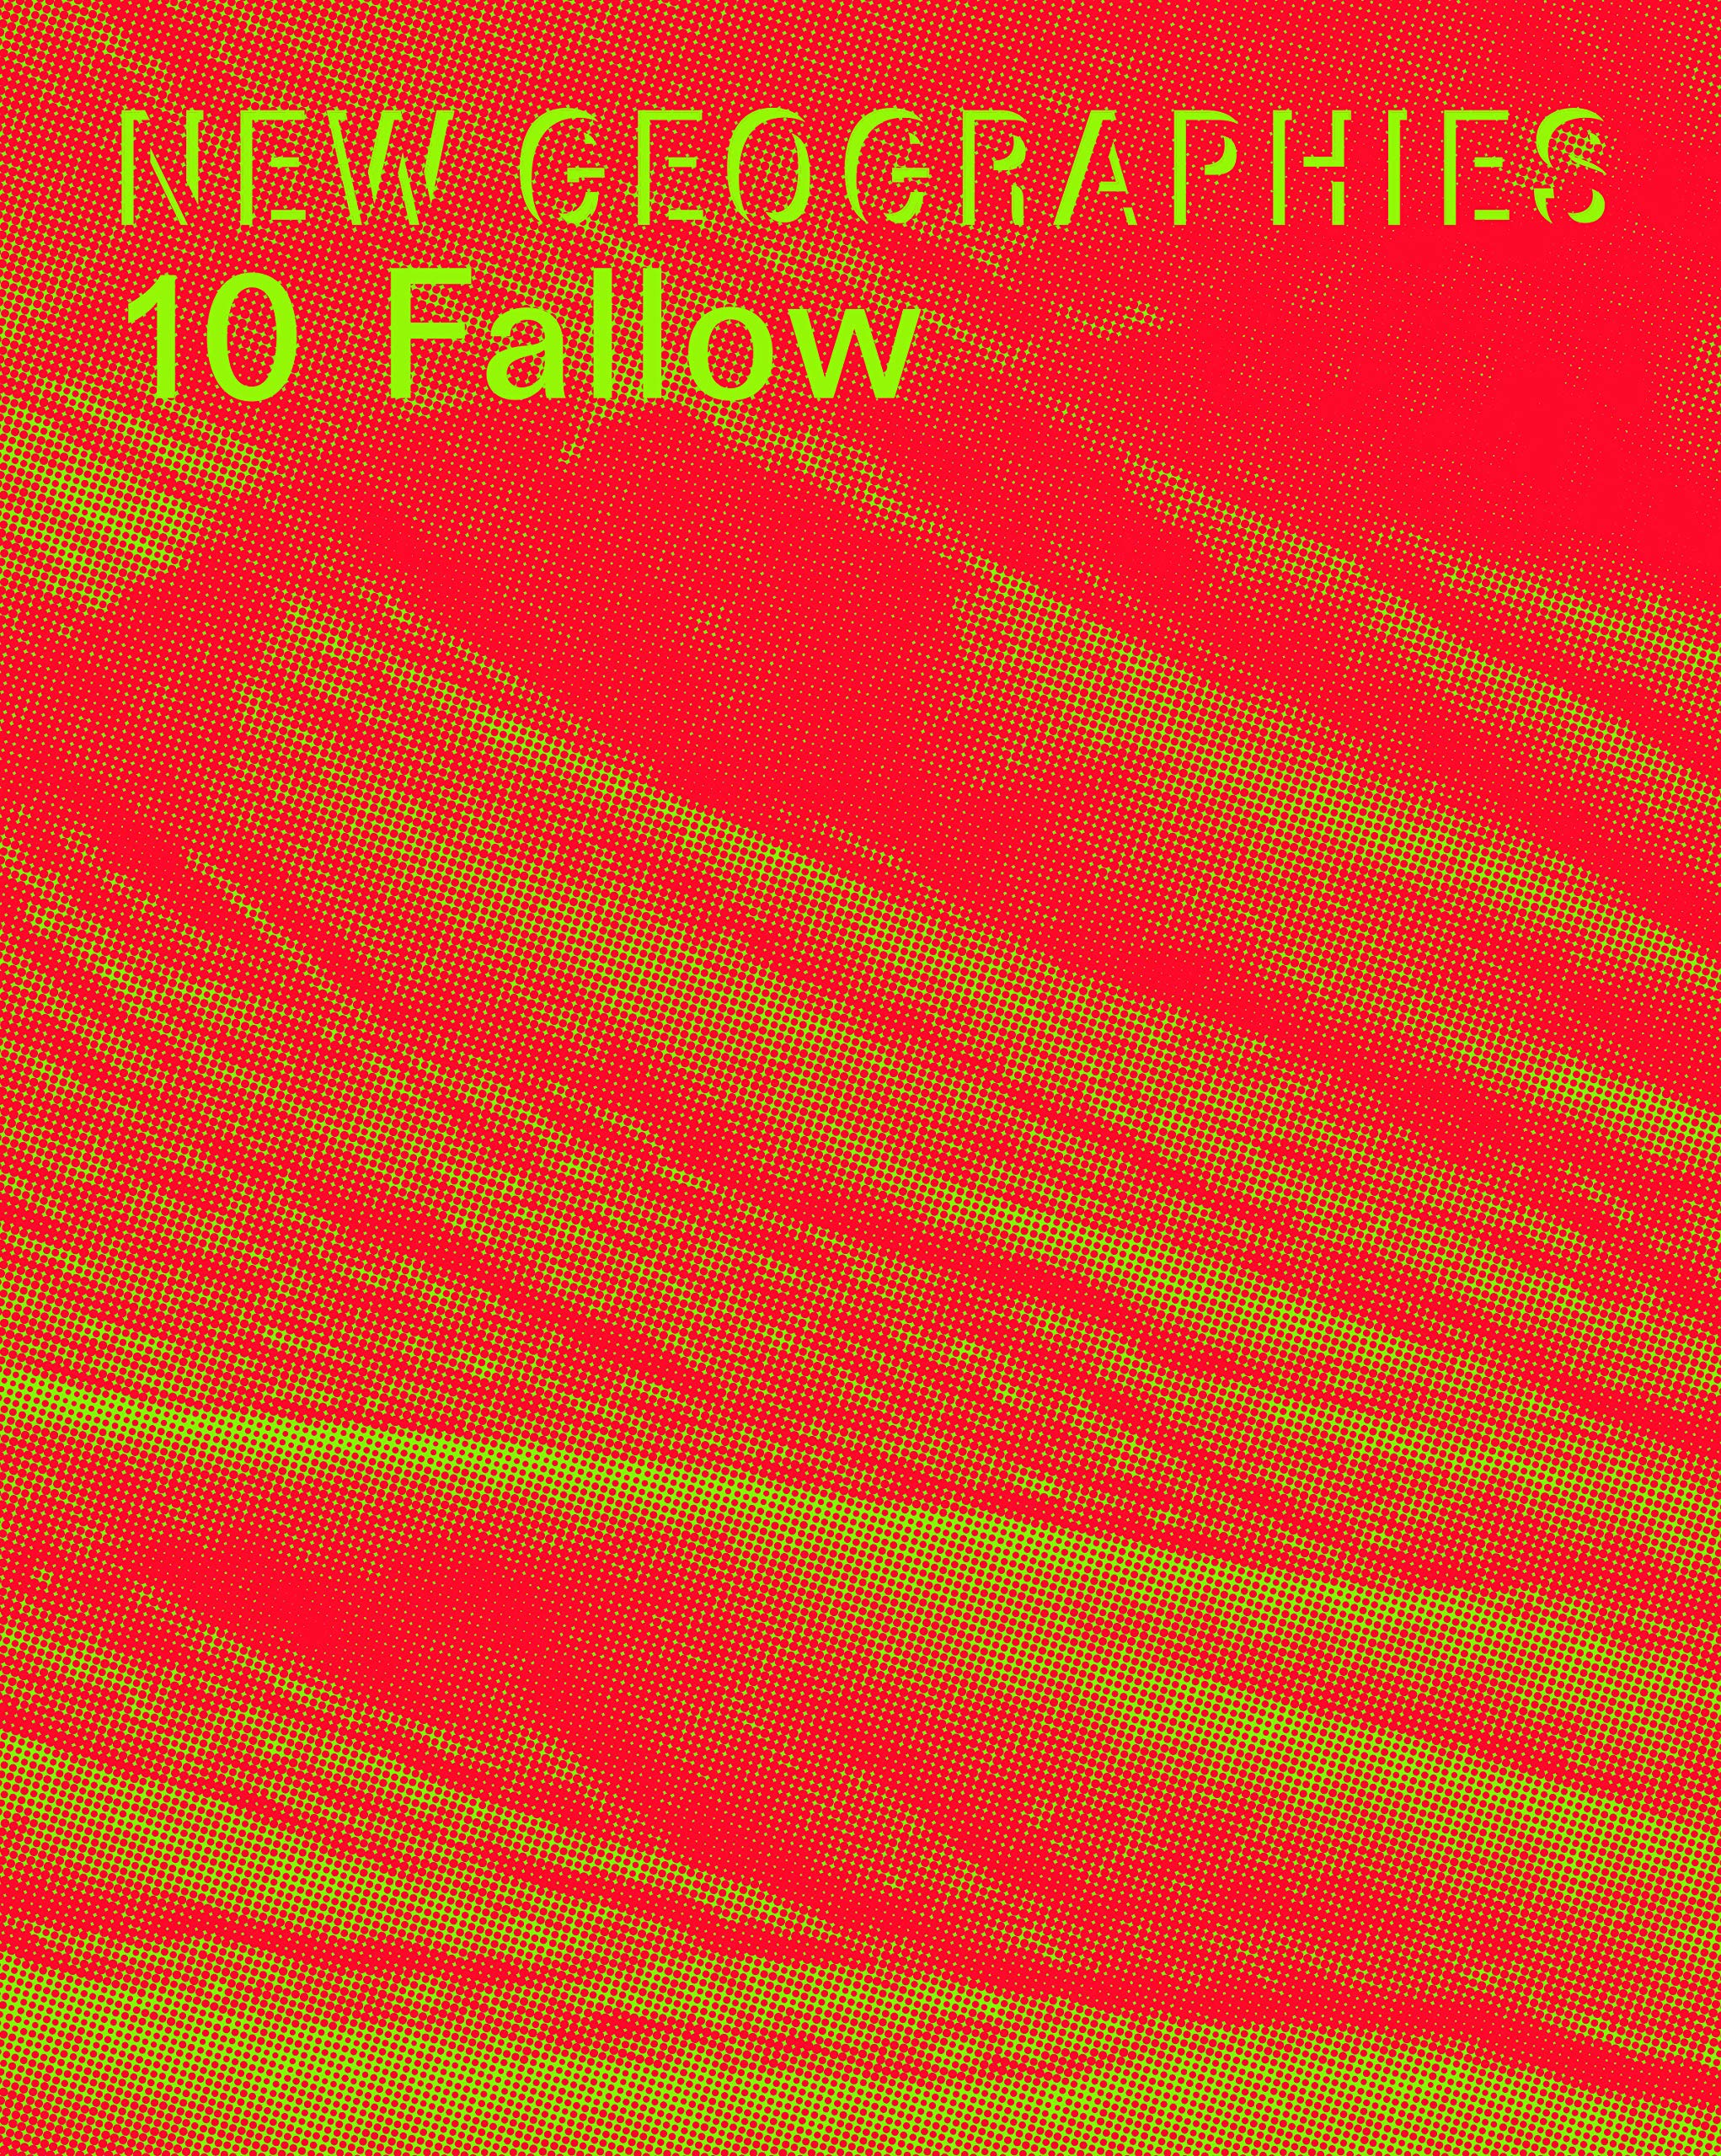 New Geographies 10: Fallow | Michael Chieffalo